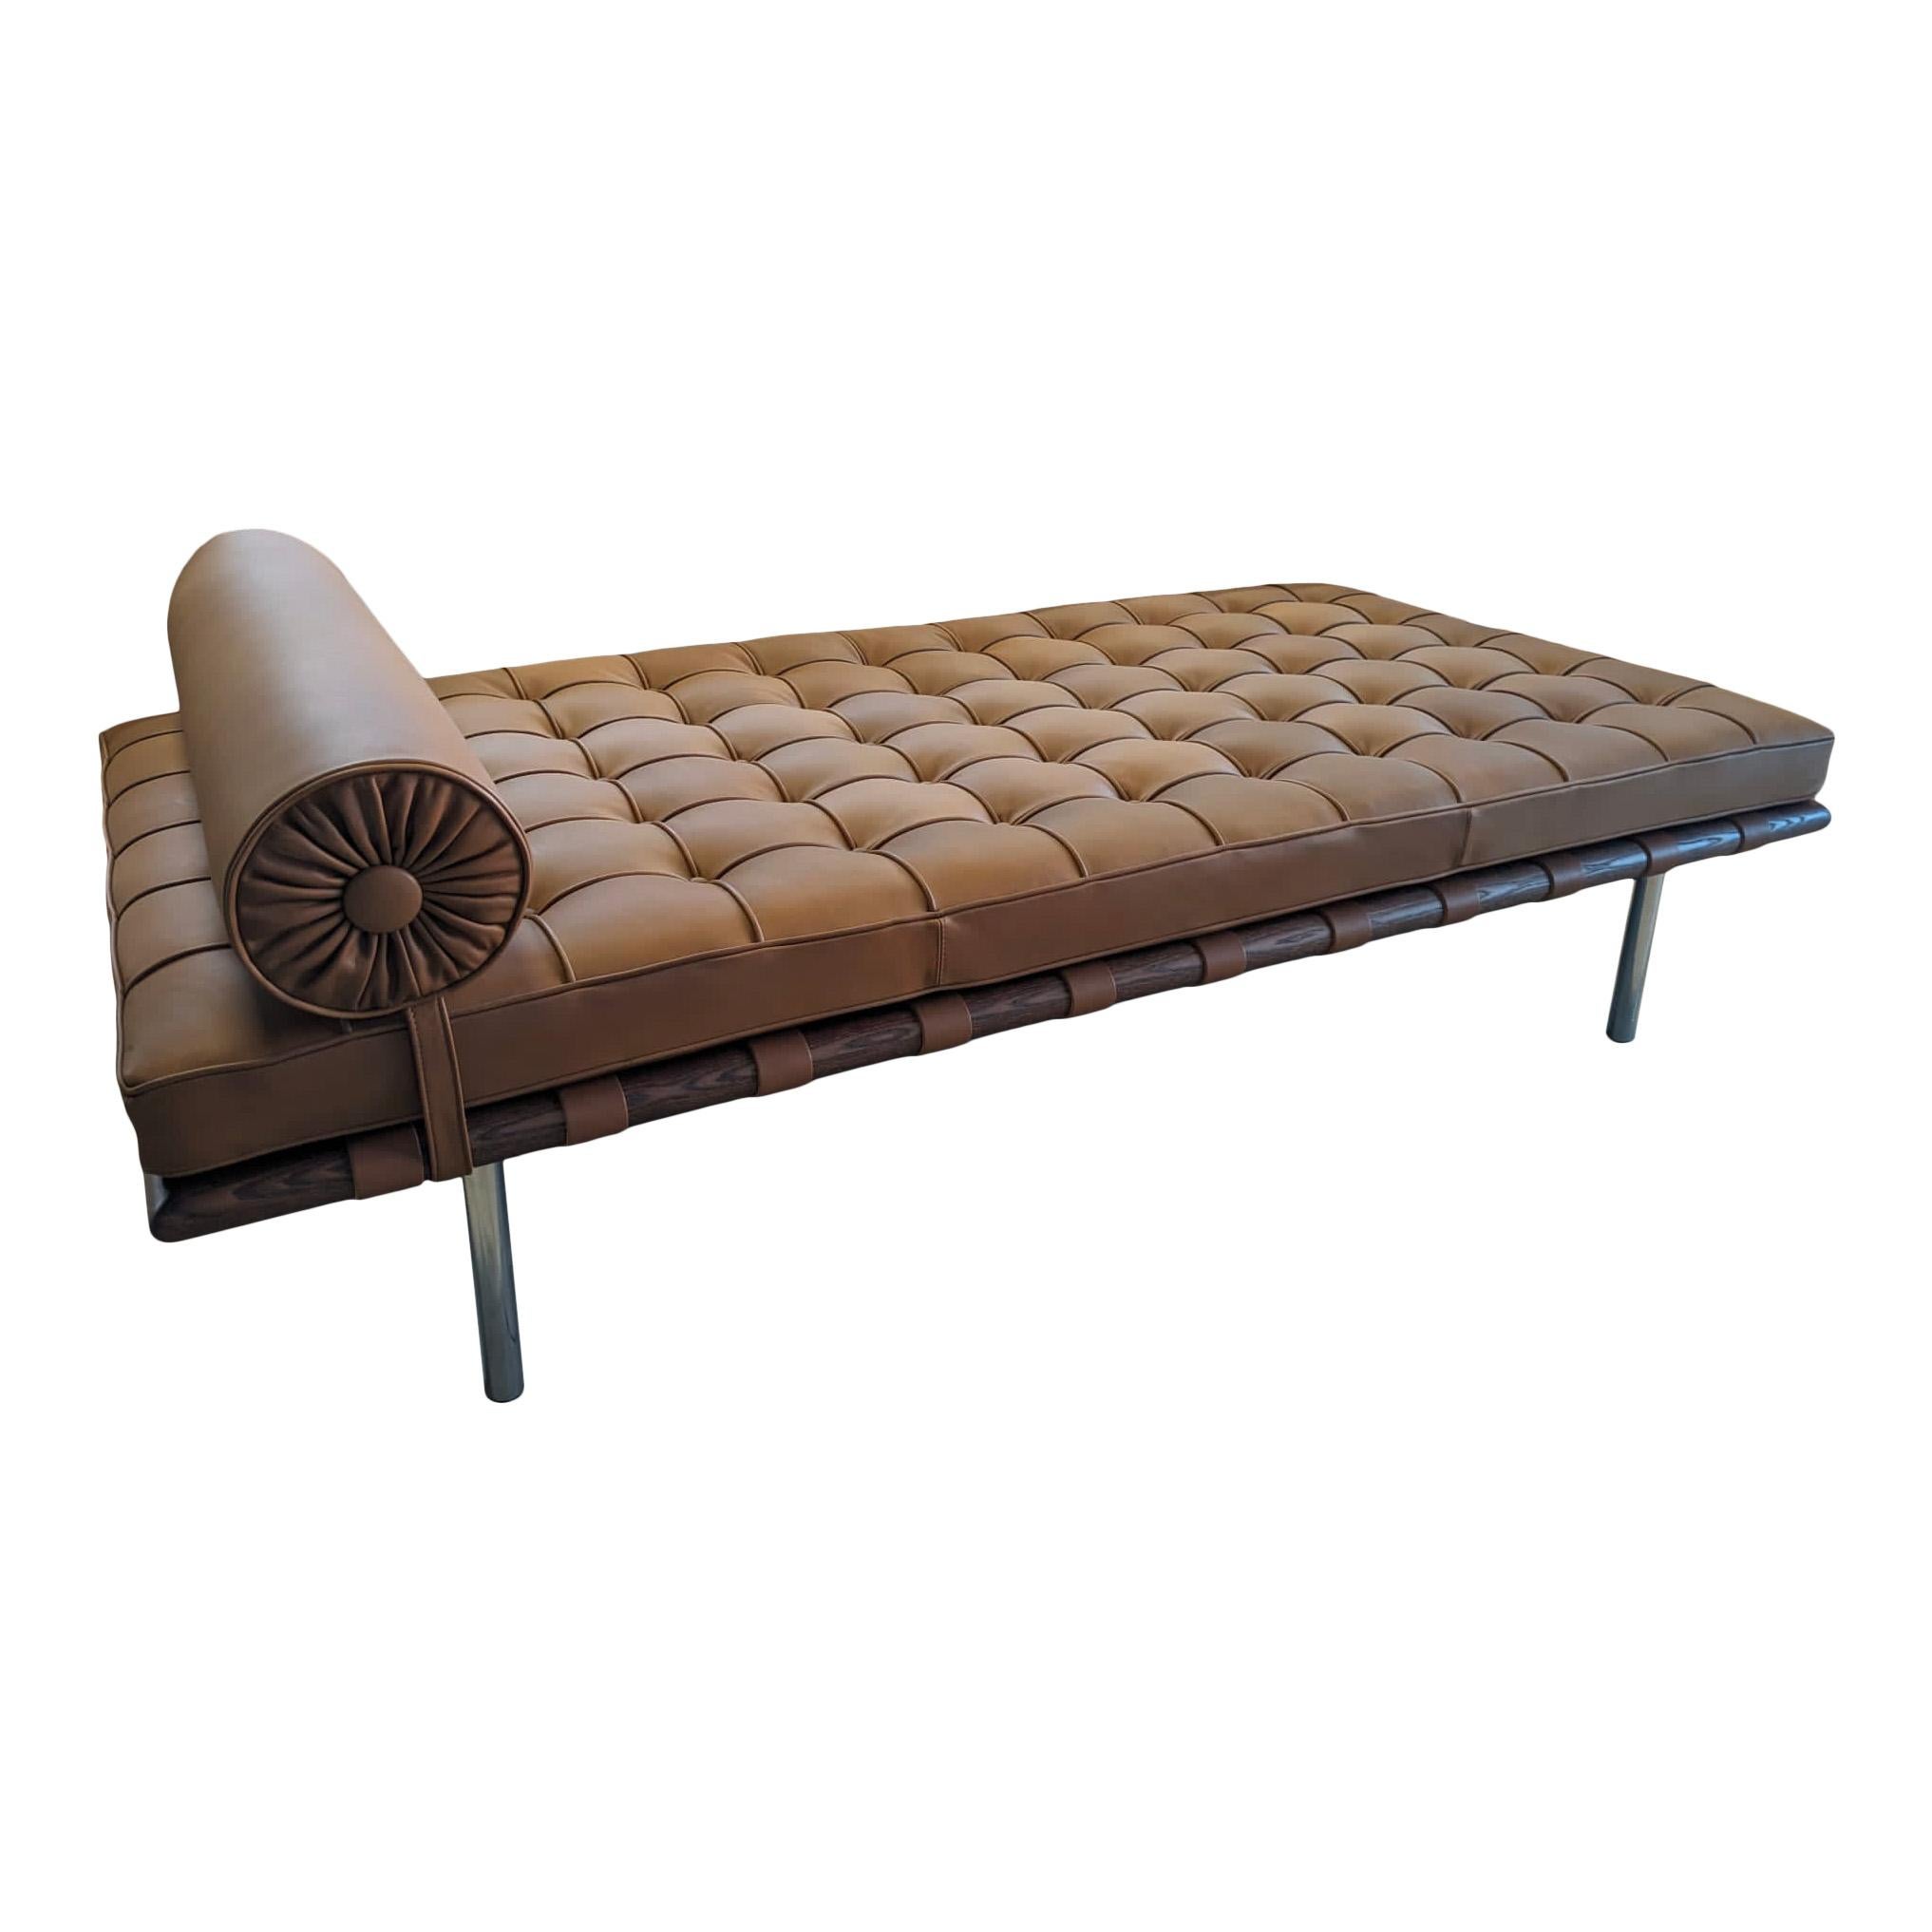 Ludwig Mies Van Der Rohe Bauhaus Coffee Leather Barcelona Daybed for Knoll, 1970 In Good Condition For Sale In Vicenza, IT